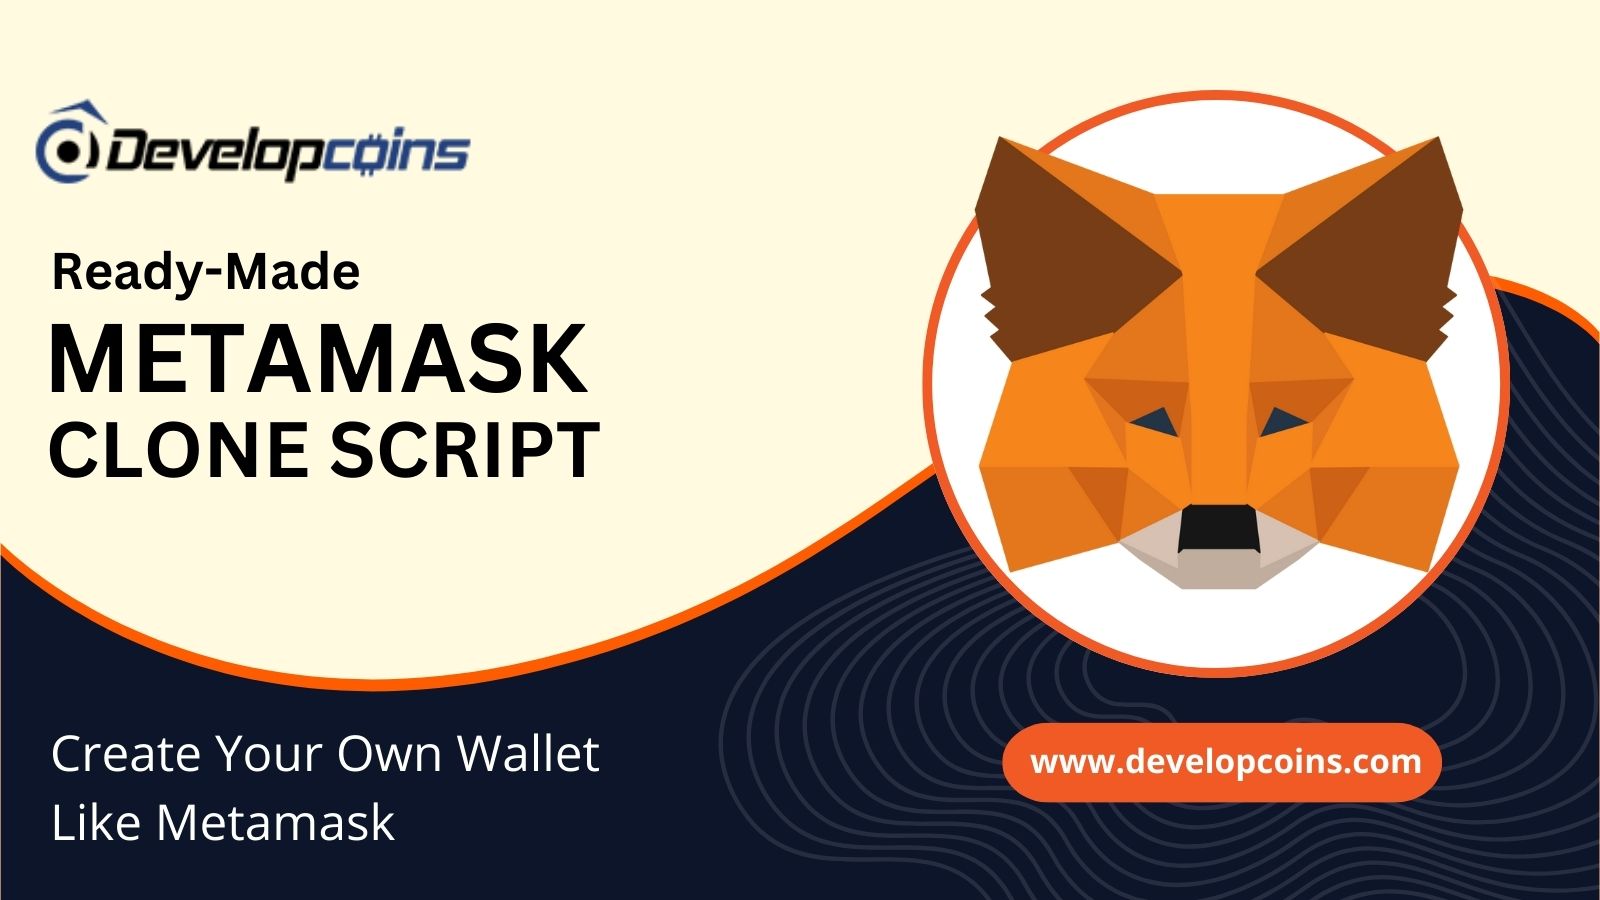 Metamask Wallet Clone Script To Create Your Own Crypto Wallet Like MetaMask